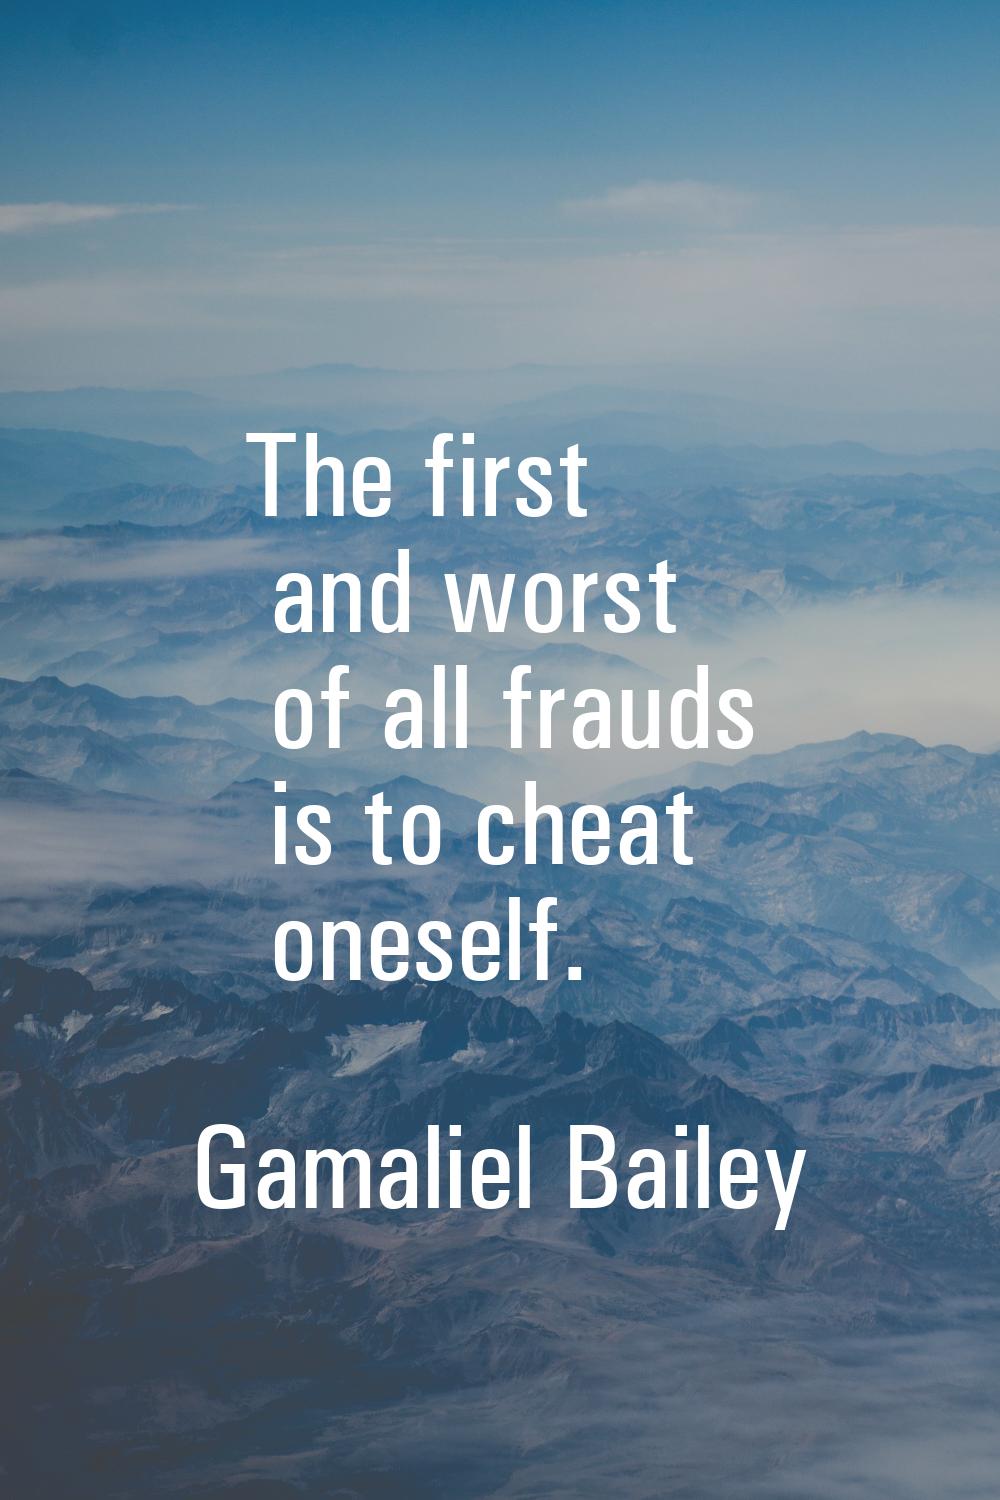 The first and worst of all frauds is to cheat oneself.